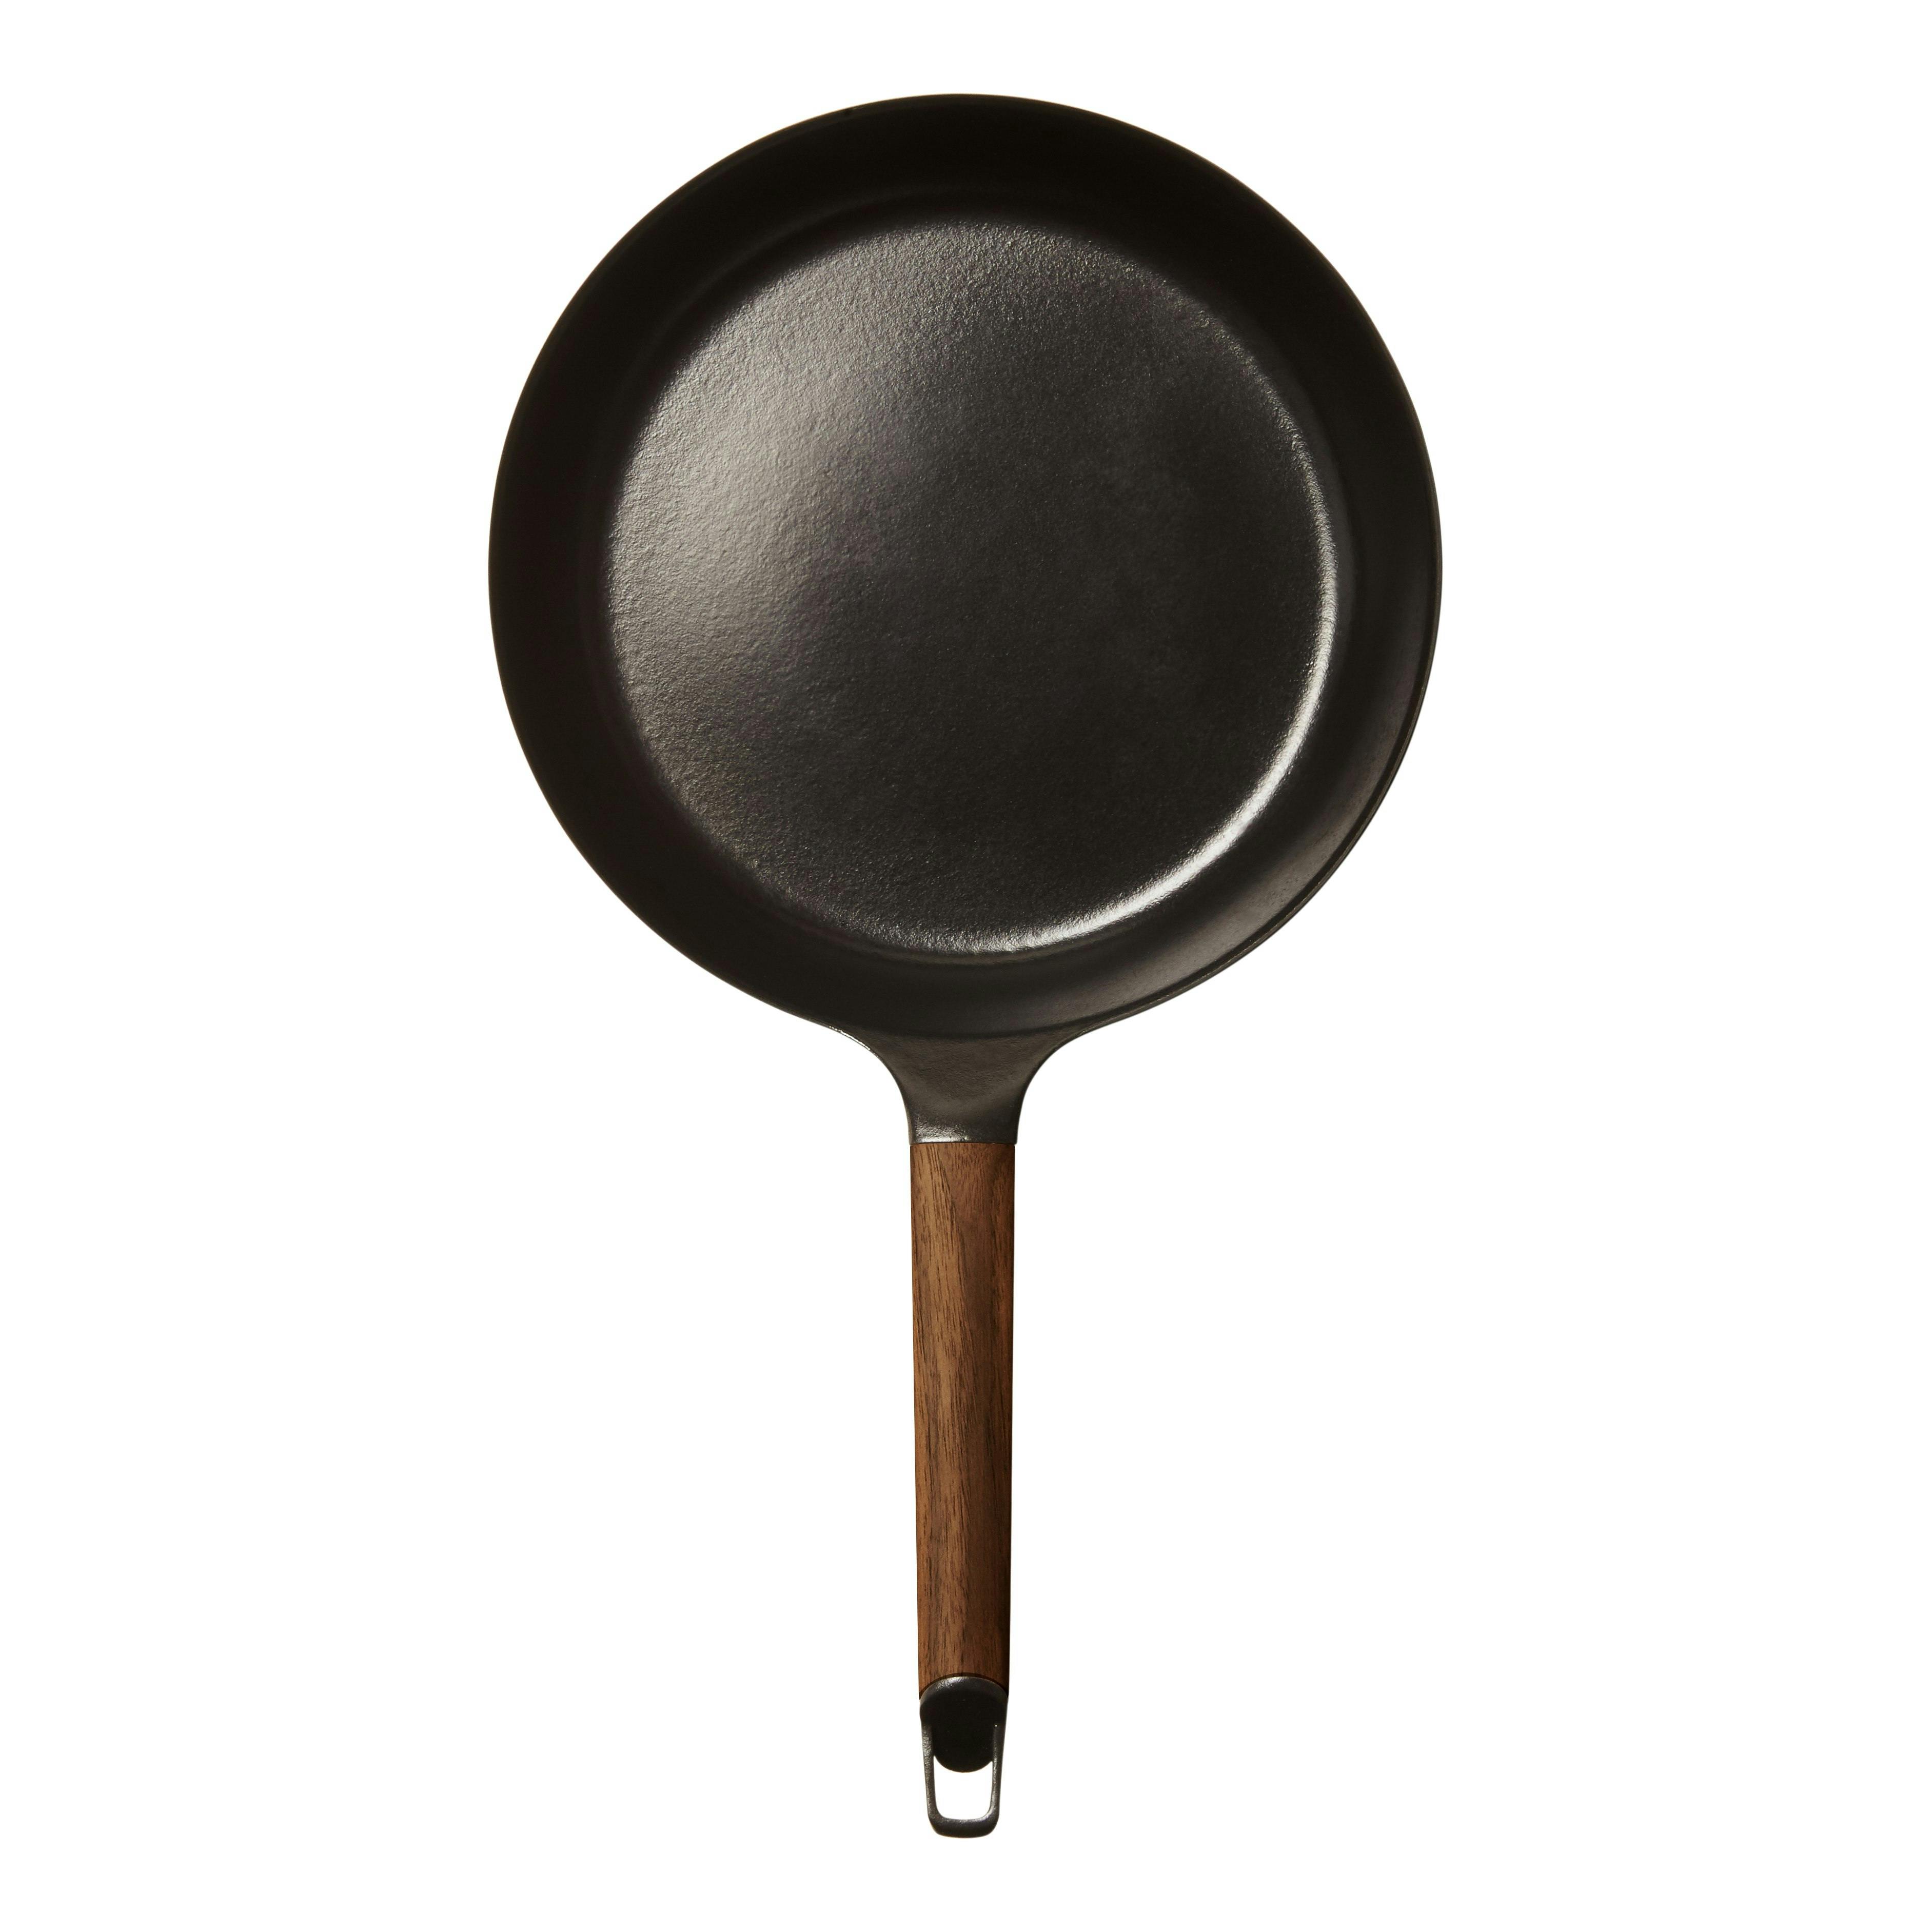 Vermicular Cast Iron Frying Pan with Lid - 10.2"